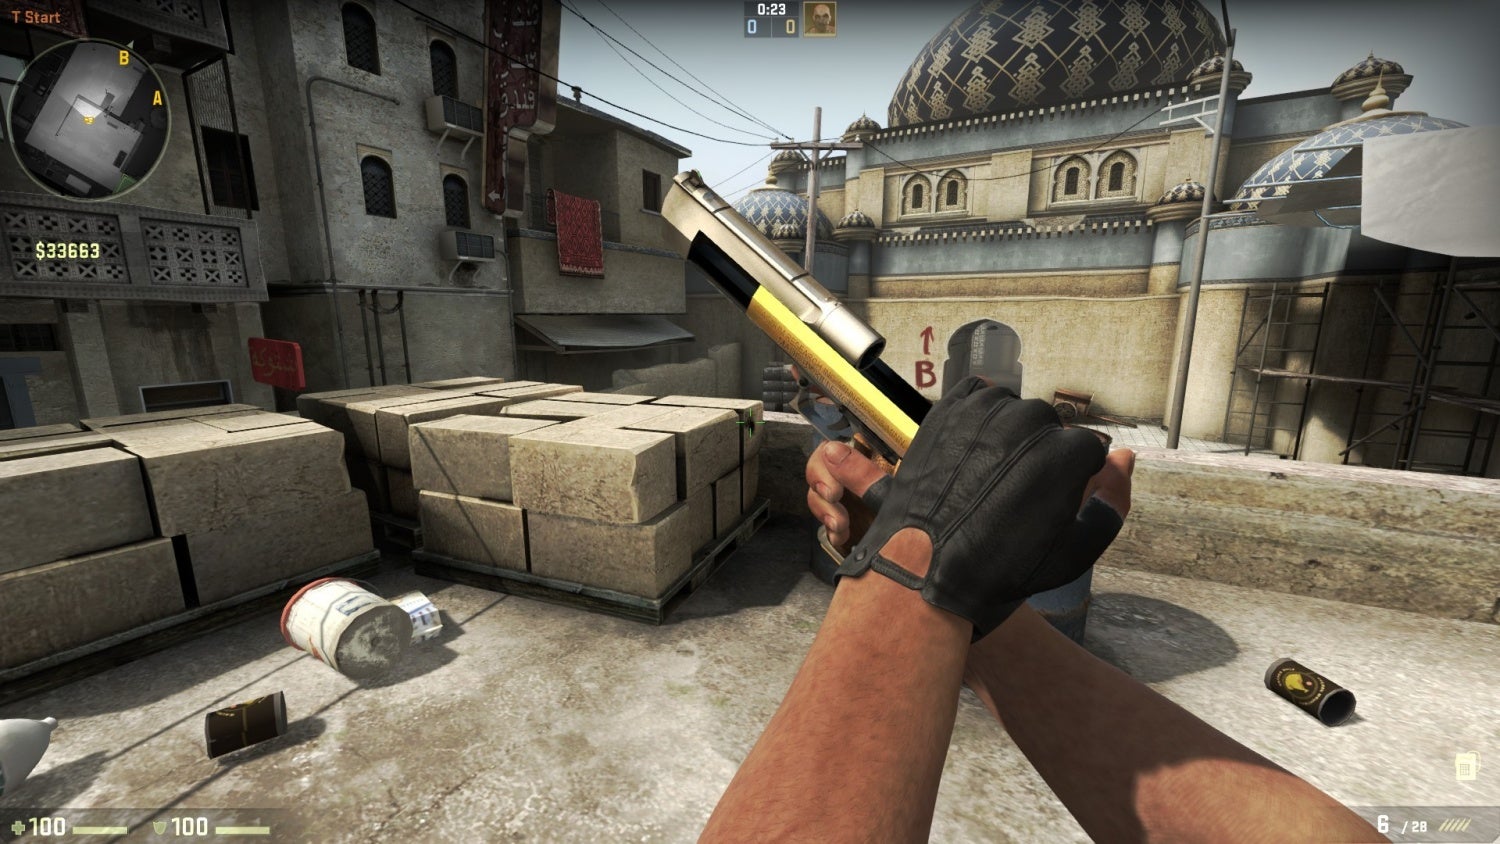 Source- Counter Strike video game. Notice the skin below the company name on the handgun. 